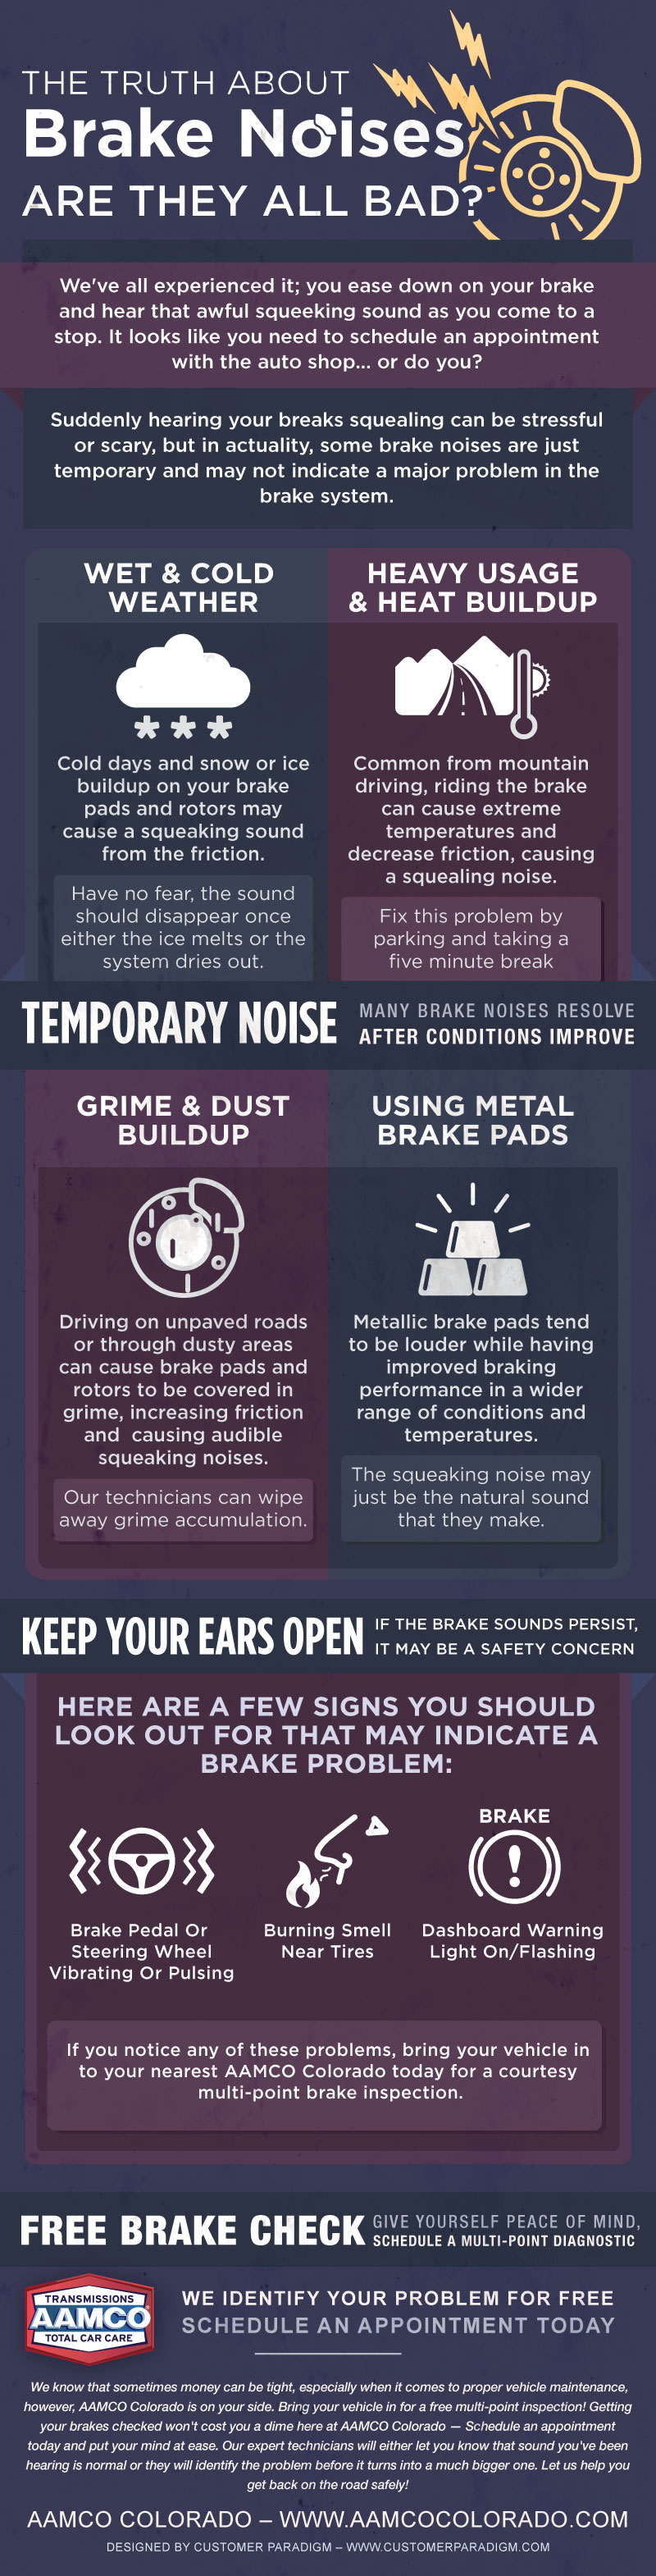 Infographic illustrating the brake noises and elaborating on whether they are serious or not